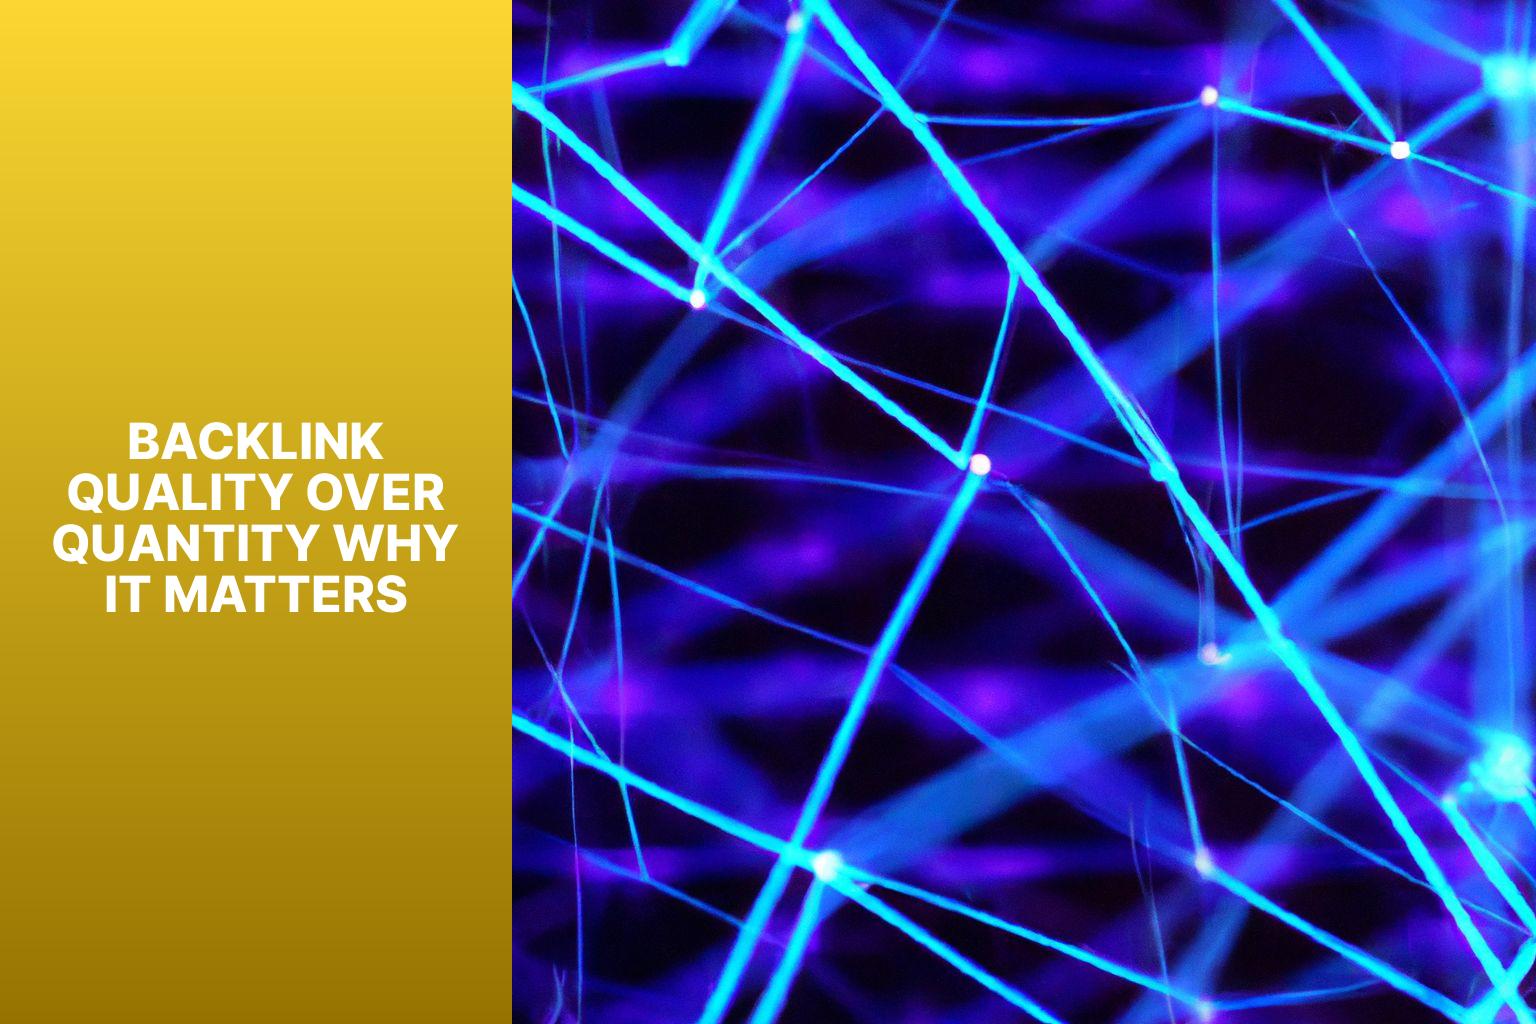 Backlink Quality Over Quantity Why It Matters